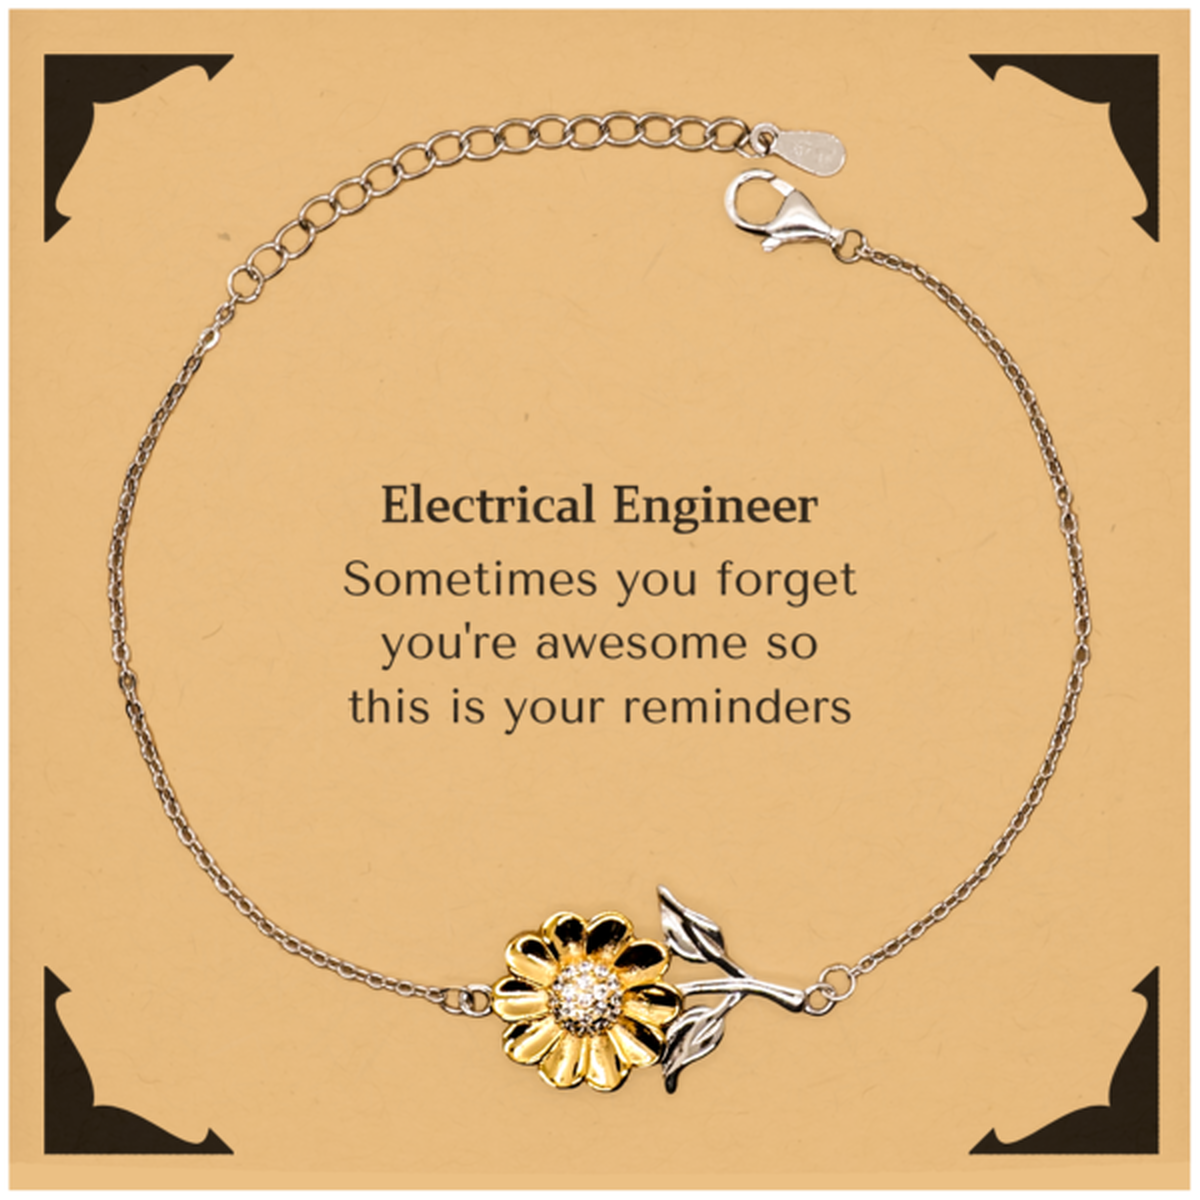 Sentimental Electrical Engineer Sunflower Bracelet, Electrical Engineer Sometimes you forget you're awesome so this is your reminders, Graduation Christmas Birthday Gifts for Electrical Engineer, Men, Women, Coworkers